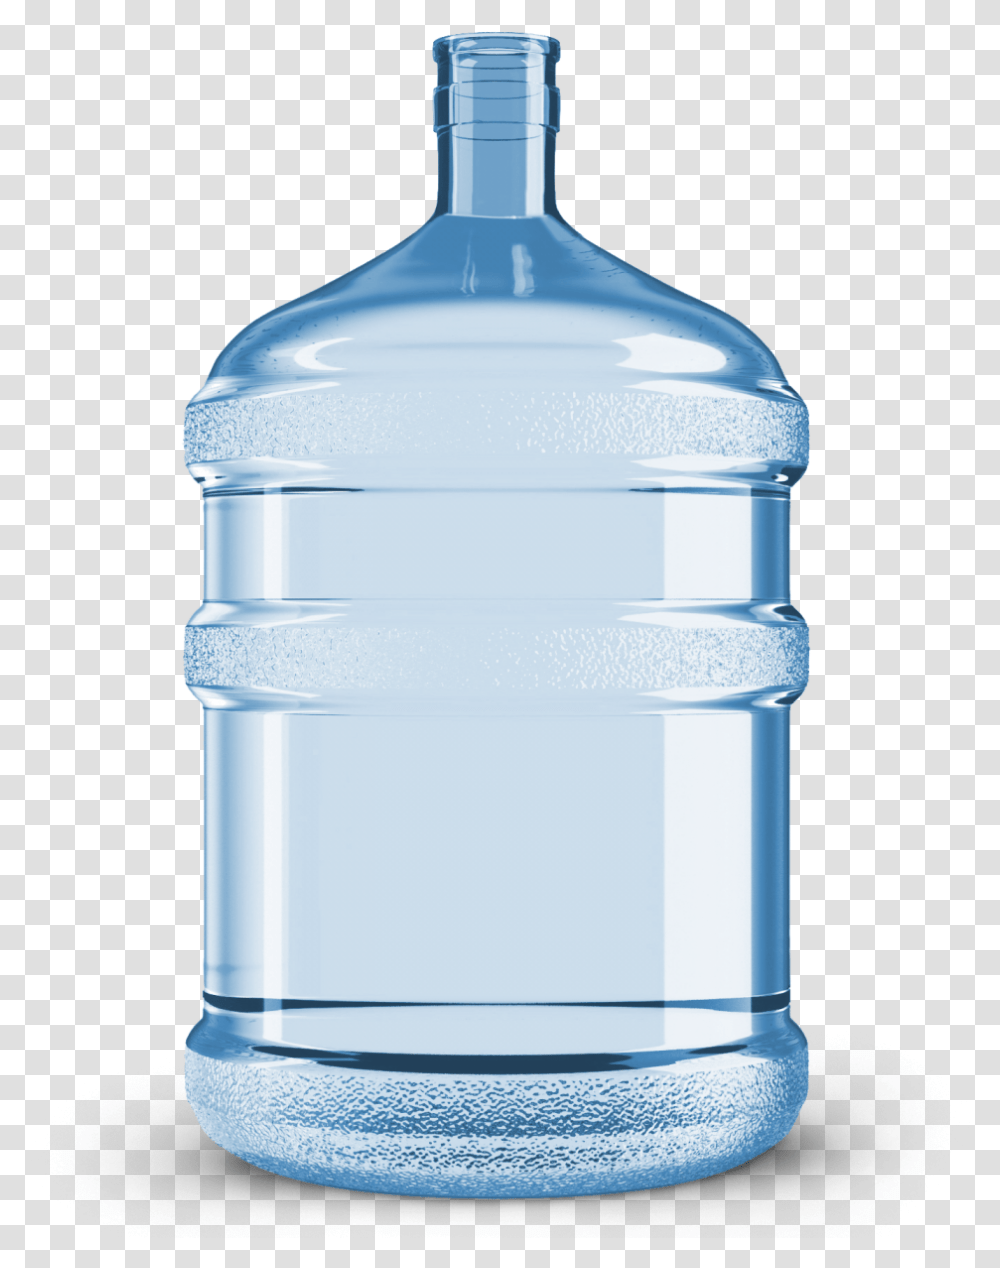 Water Bottle Photo Drinking Water Bottle, Mineral Water, Beverage, Mixer, Appliance Transparent Png